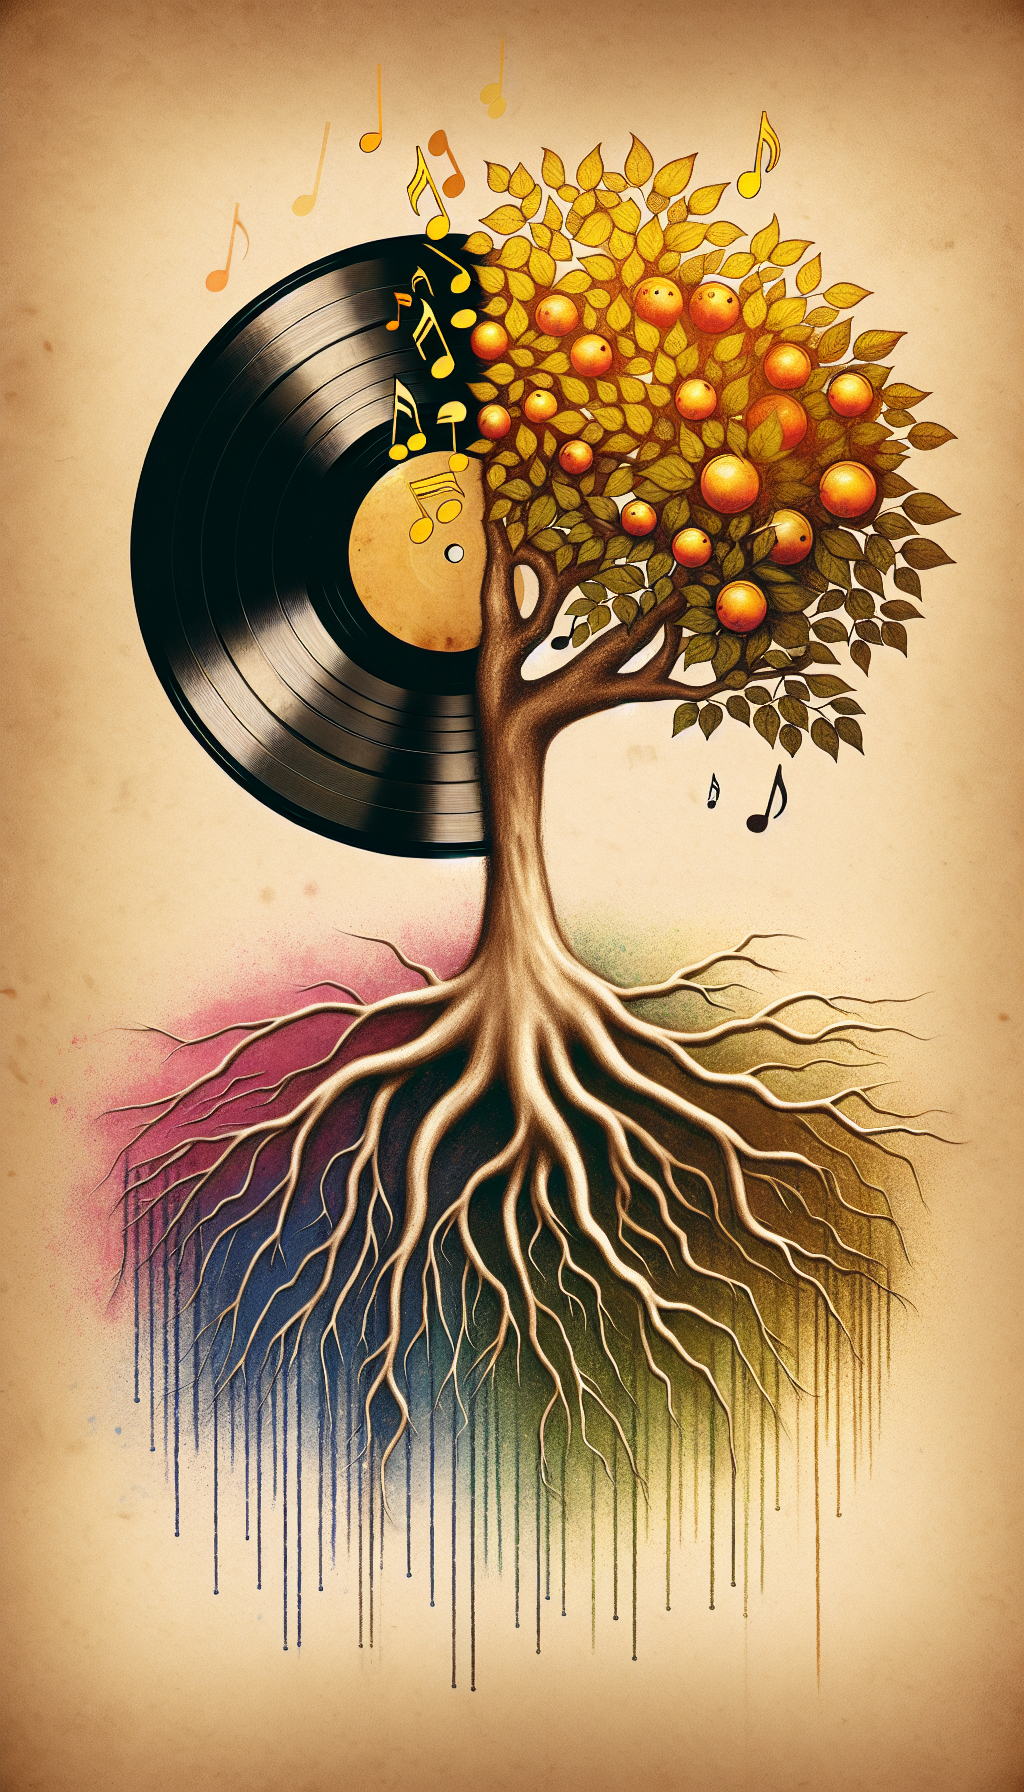 An illustration portrays a vinyl record transforming into a tree, with roots symbolizing different maintenance tips and its leaves shimmering with golden musical notes to signify value enhancement. Half the tree exudes a vintage, sepia-tone look, while the other half blooms in vibrant watercolors, seamlessly blending nostalgia with the vivacity of present-day preservation.